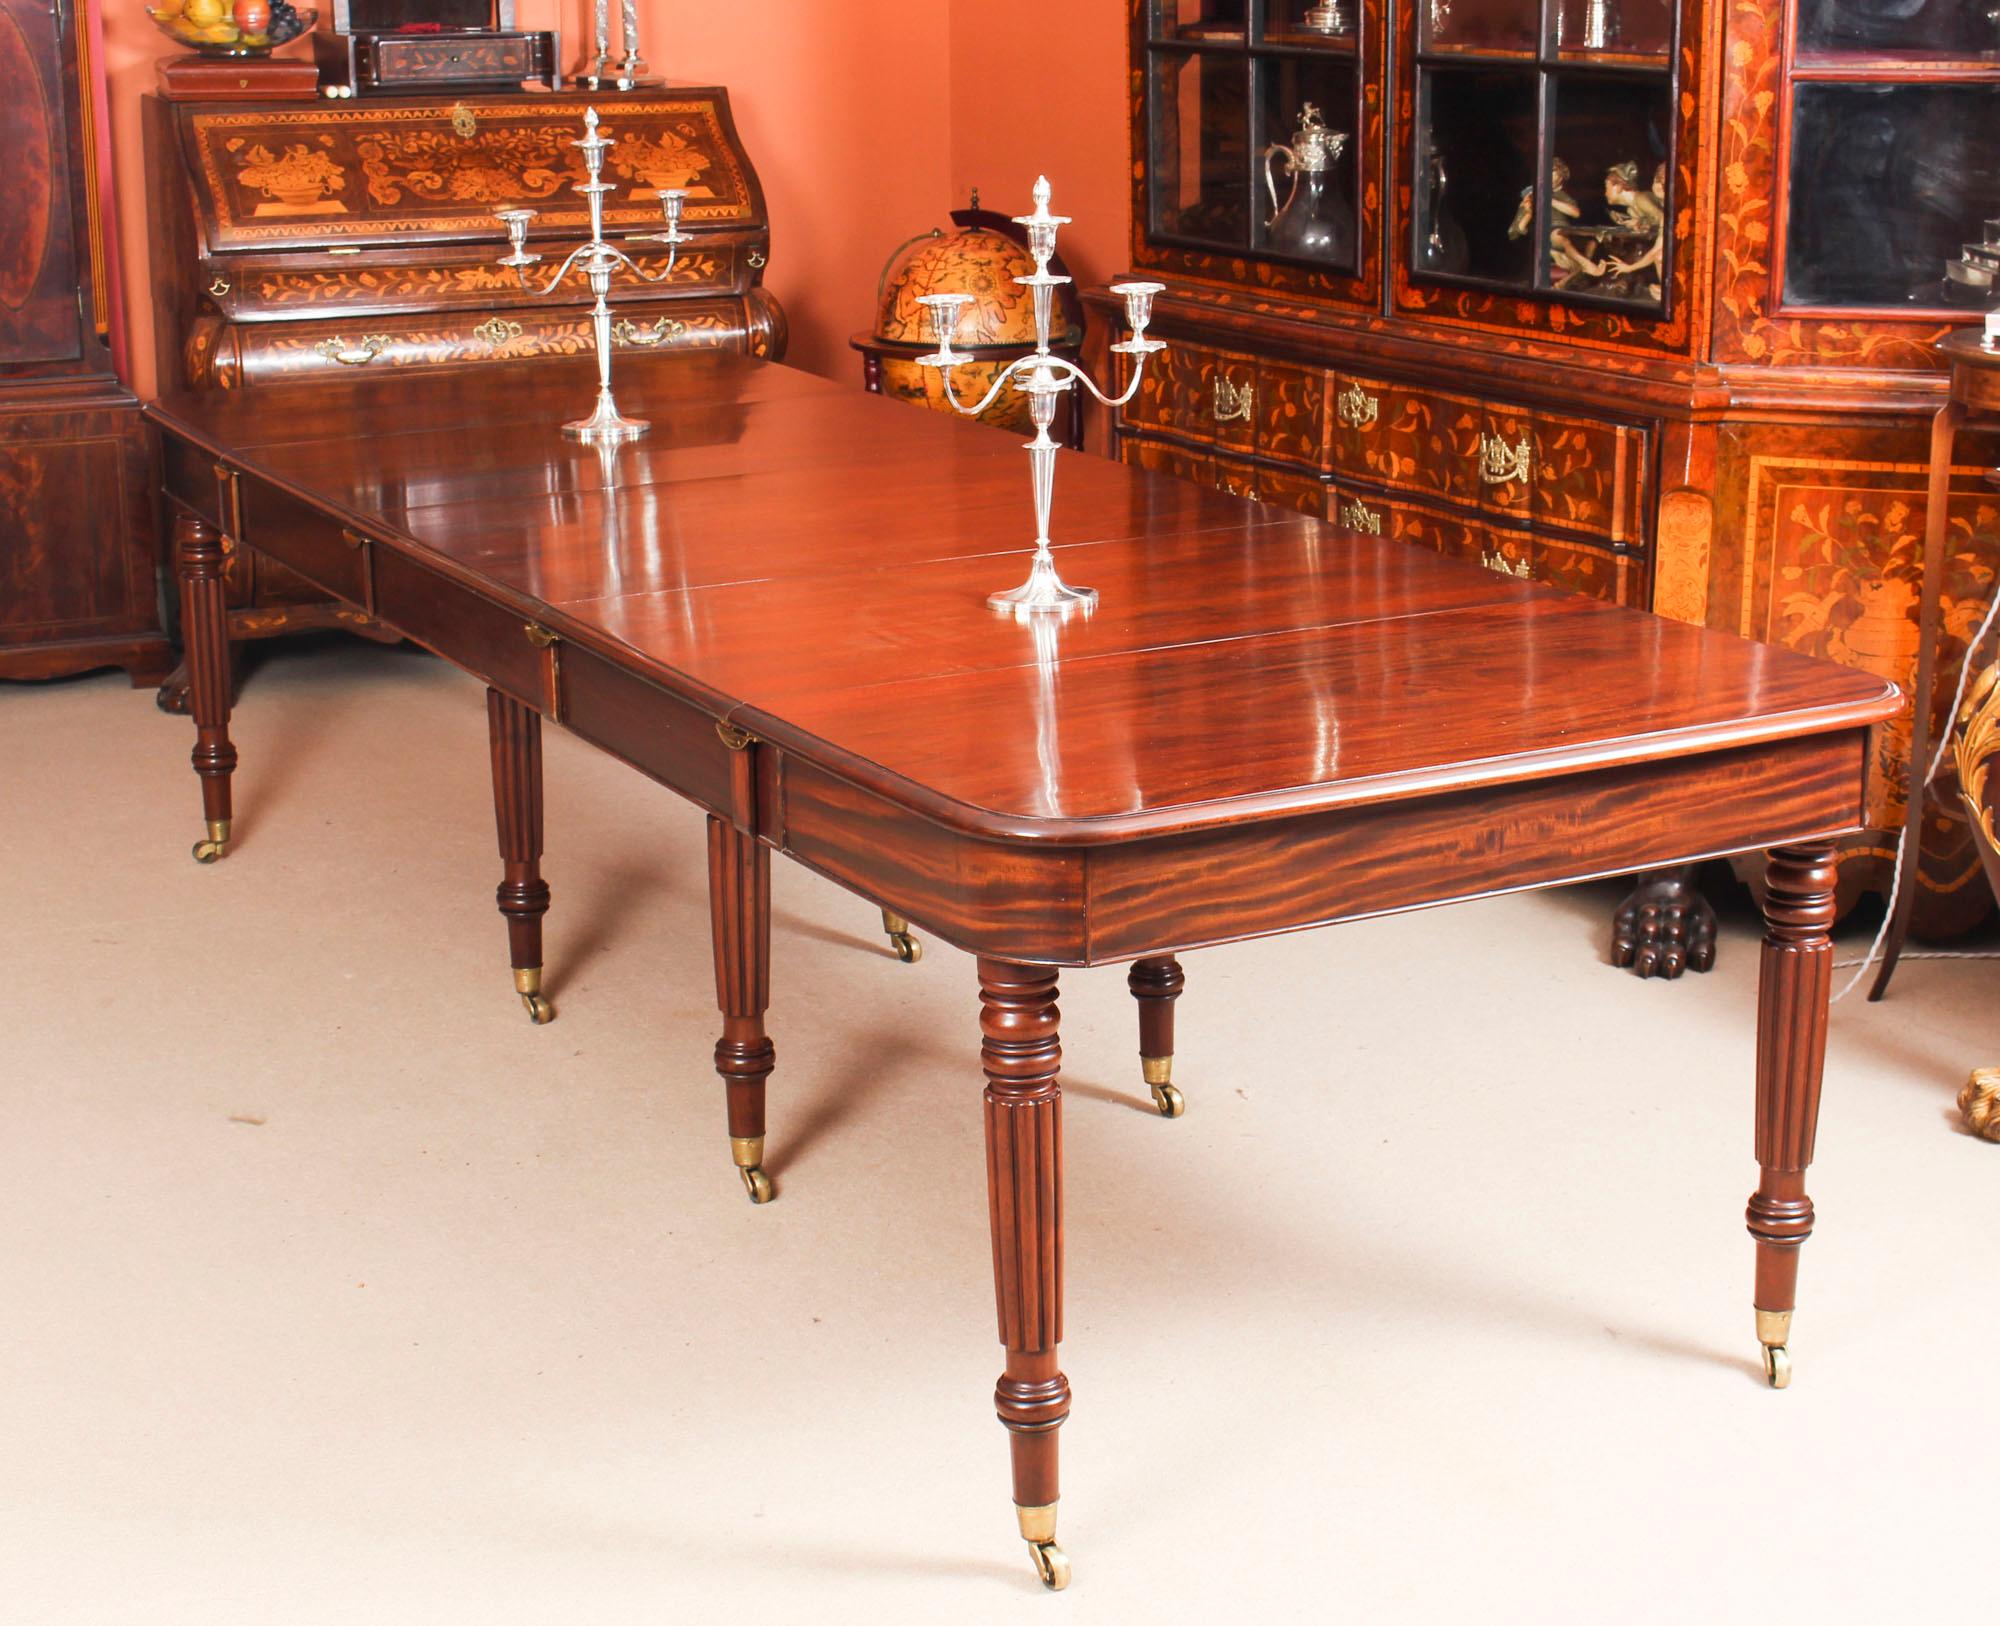 A very rare opportunity to own an antique English Regency dining table in the manner of Gillows, circa 1820 in date.

This amazing table has three leaves, which can be added or removed as required to suit the occasion. It has been handcrafted from